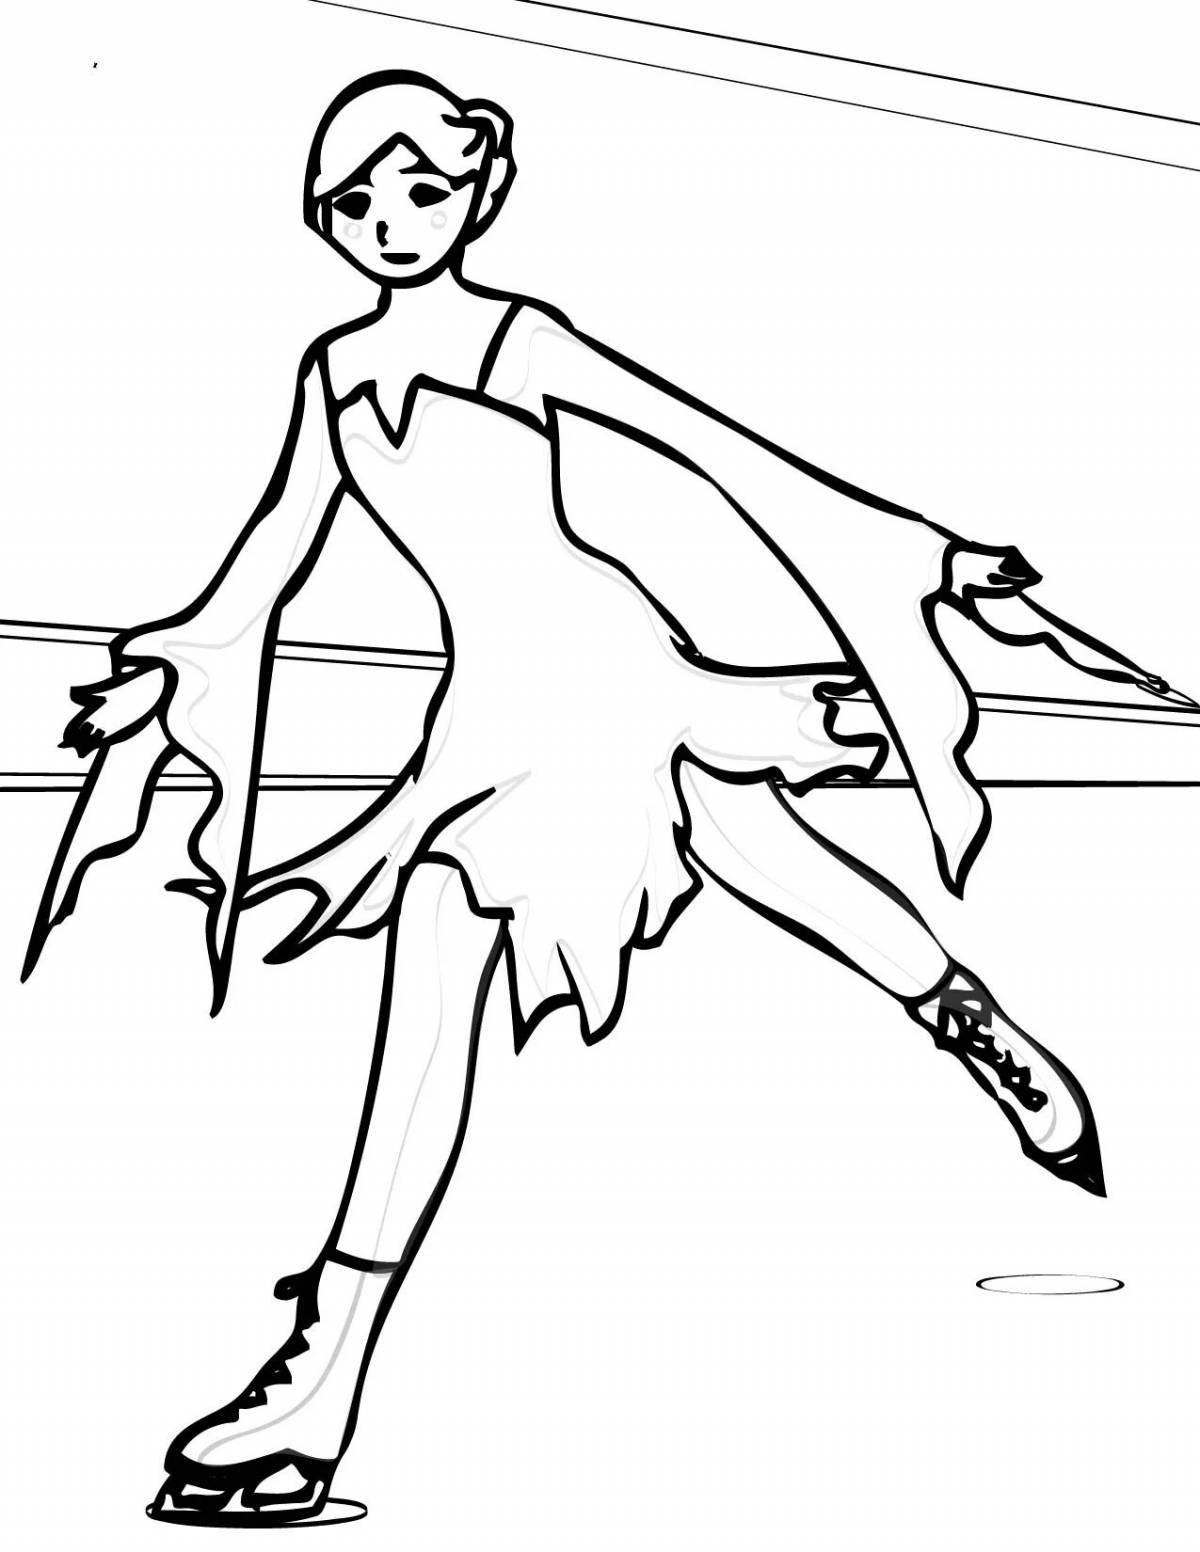 Gorgeous figure skater girl coloring book